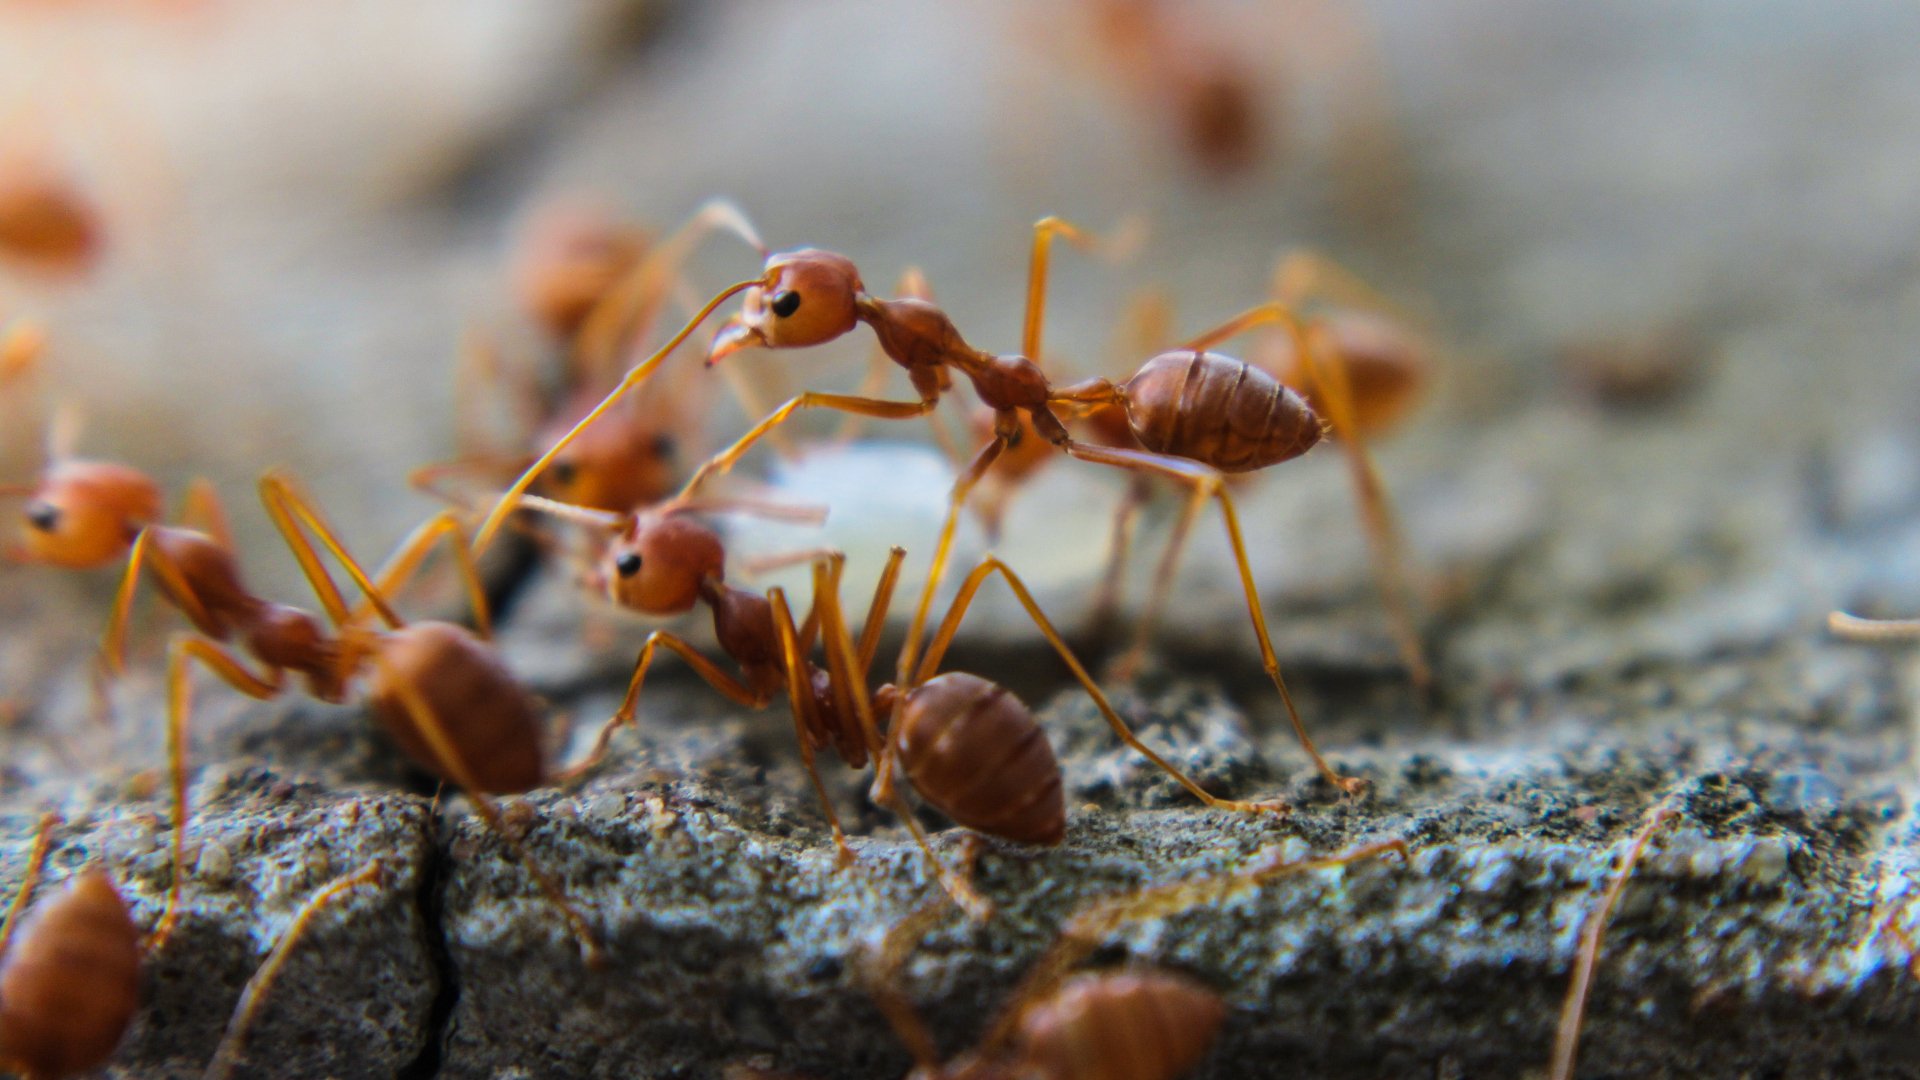 How Do You Get Rid of Fire Ants?